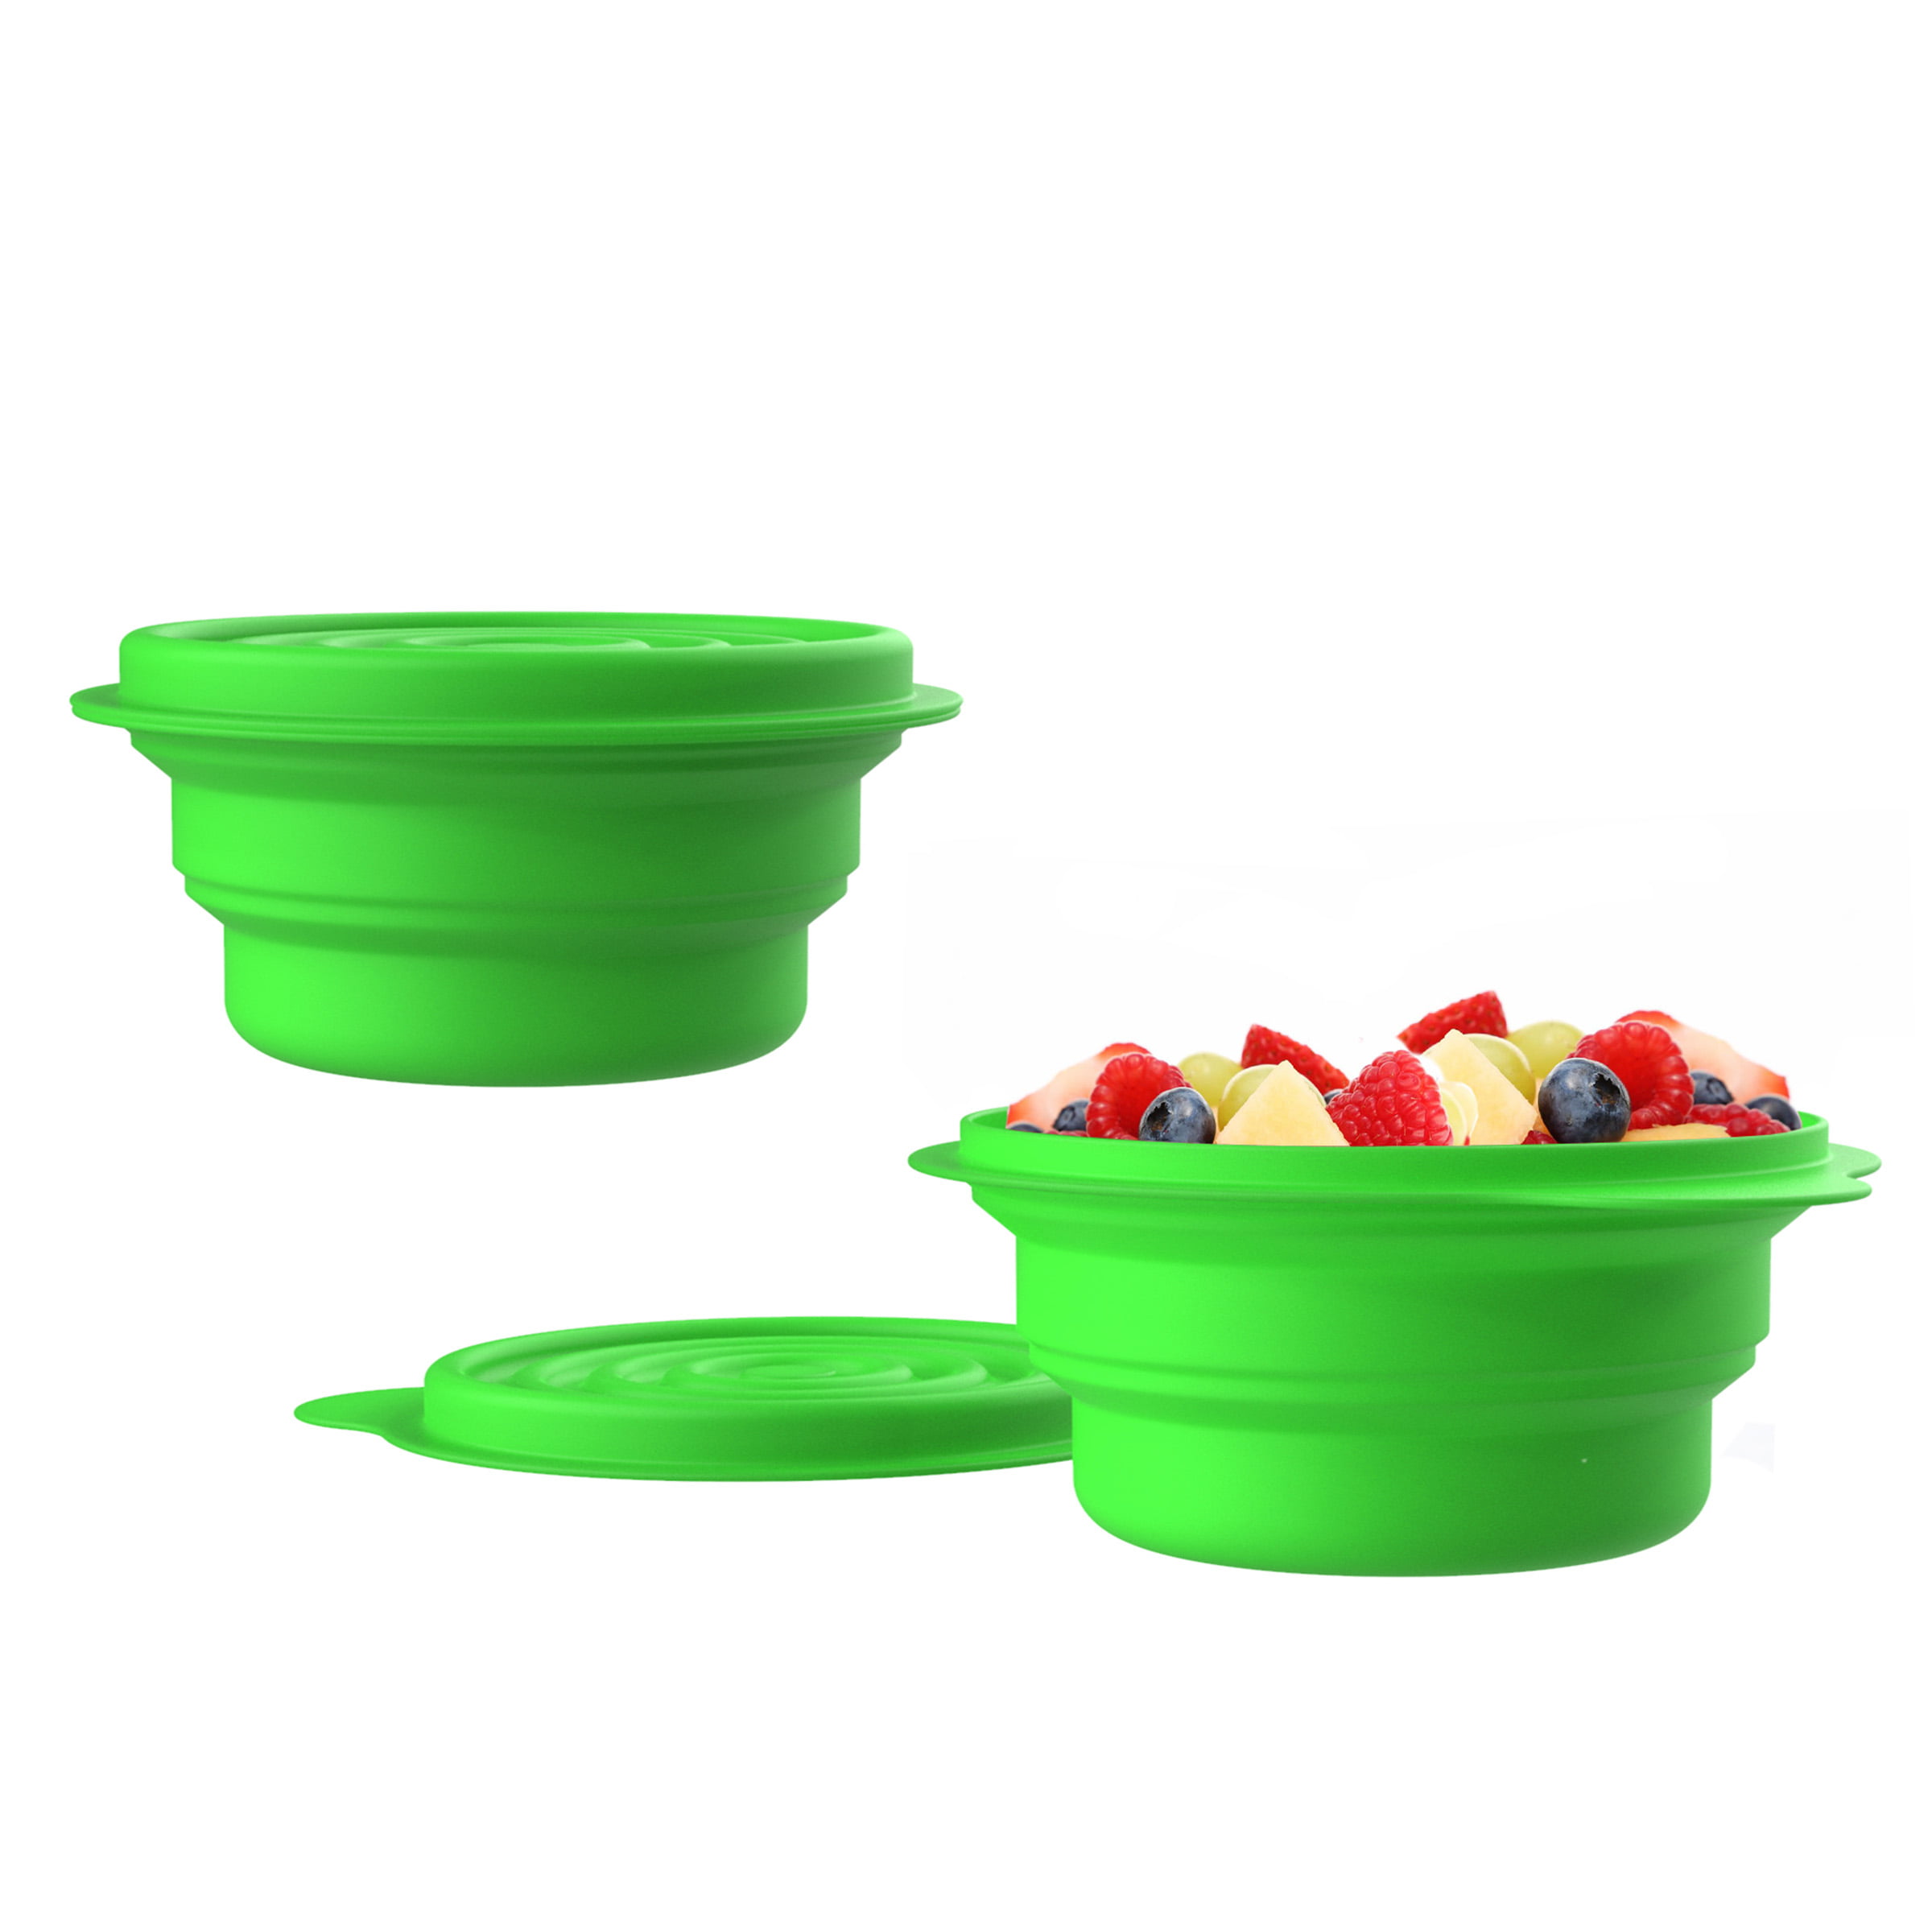 500ML Collapsible Camping Bowl with Lid-Lightweight Silicone Foldable  Travel Bowl-Expandable Folding Reusable Portable Bowl-Microwave and Fridge  Food